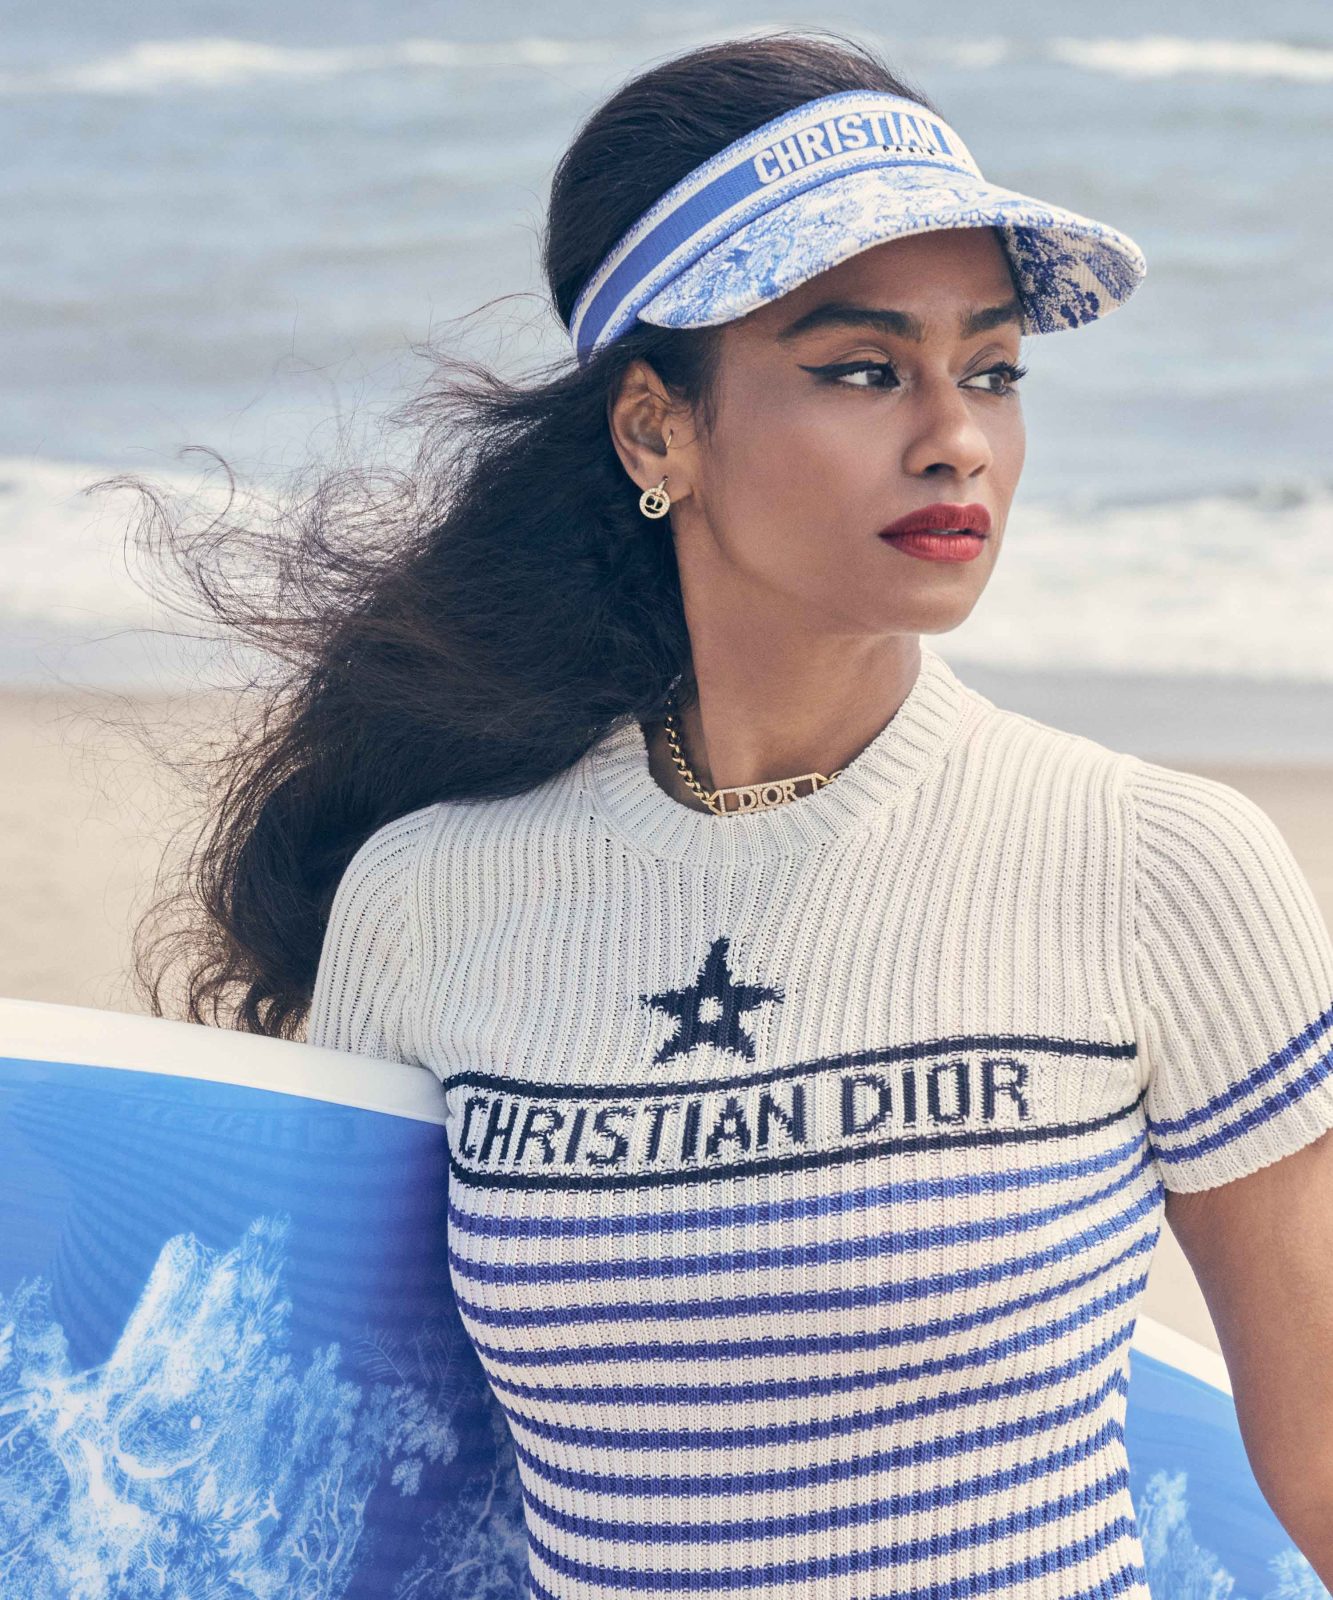 Welcome To The Dioriviera: Haute Living's Exclusive Editorial Featuring Dior's New Summer Capsule Collection